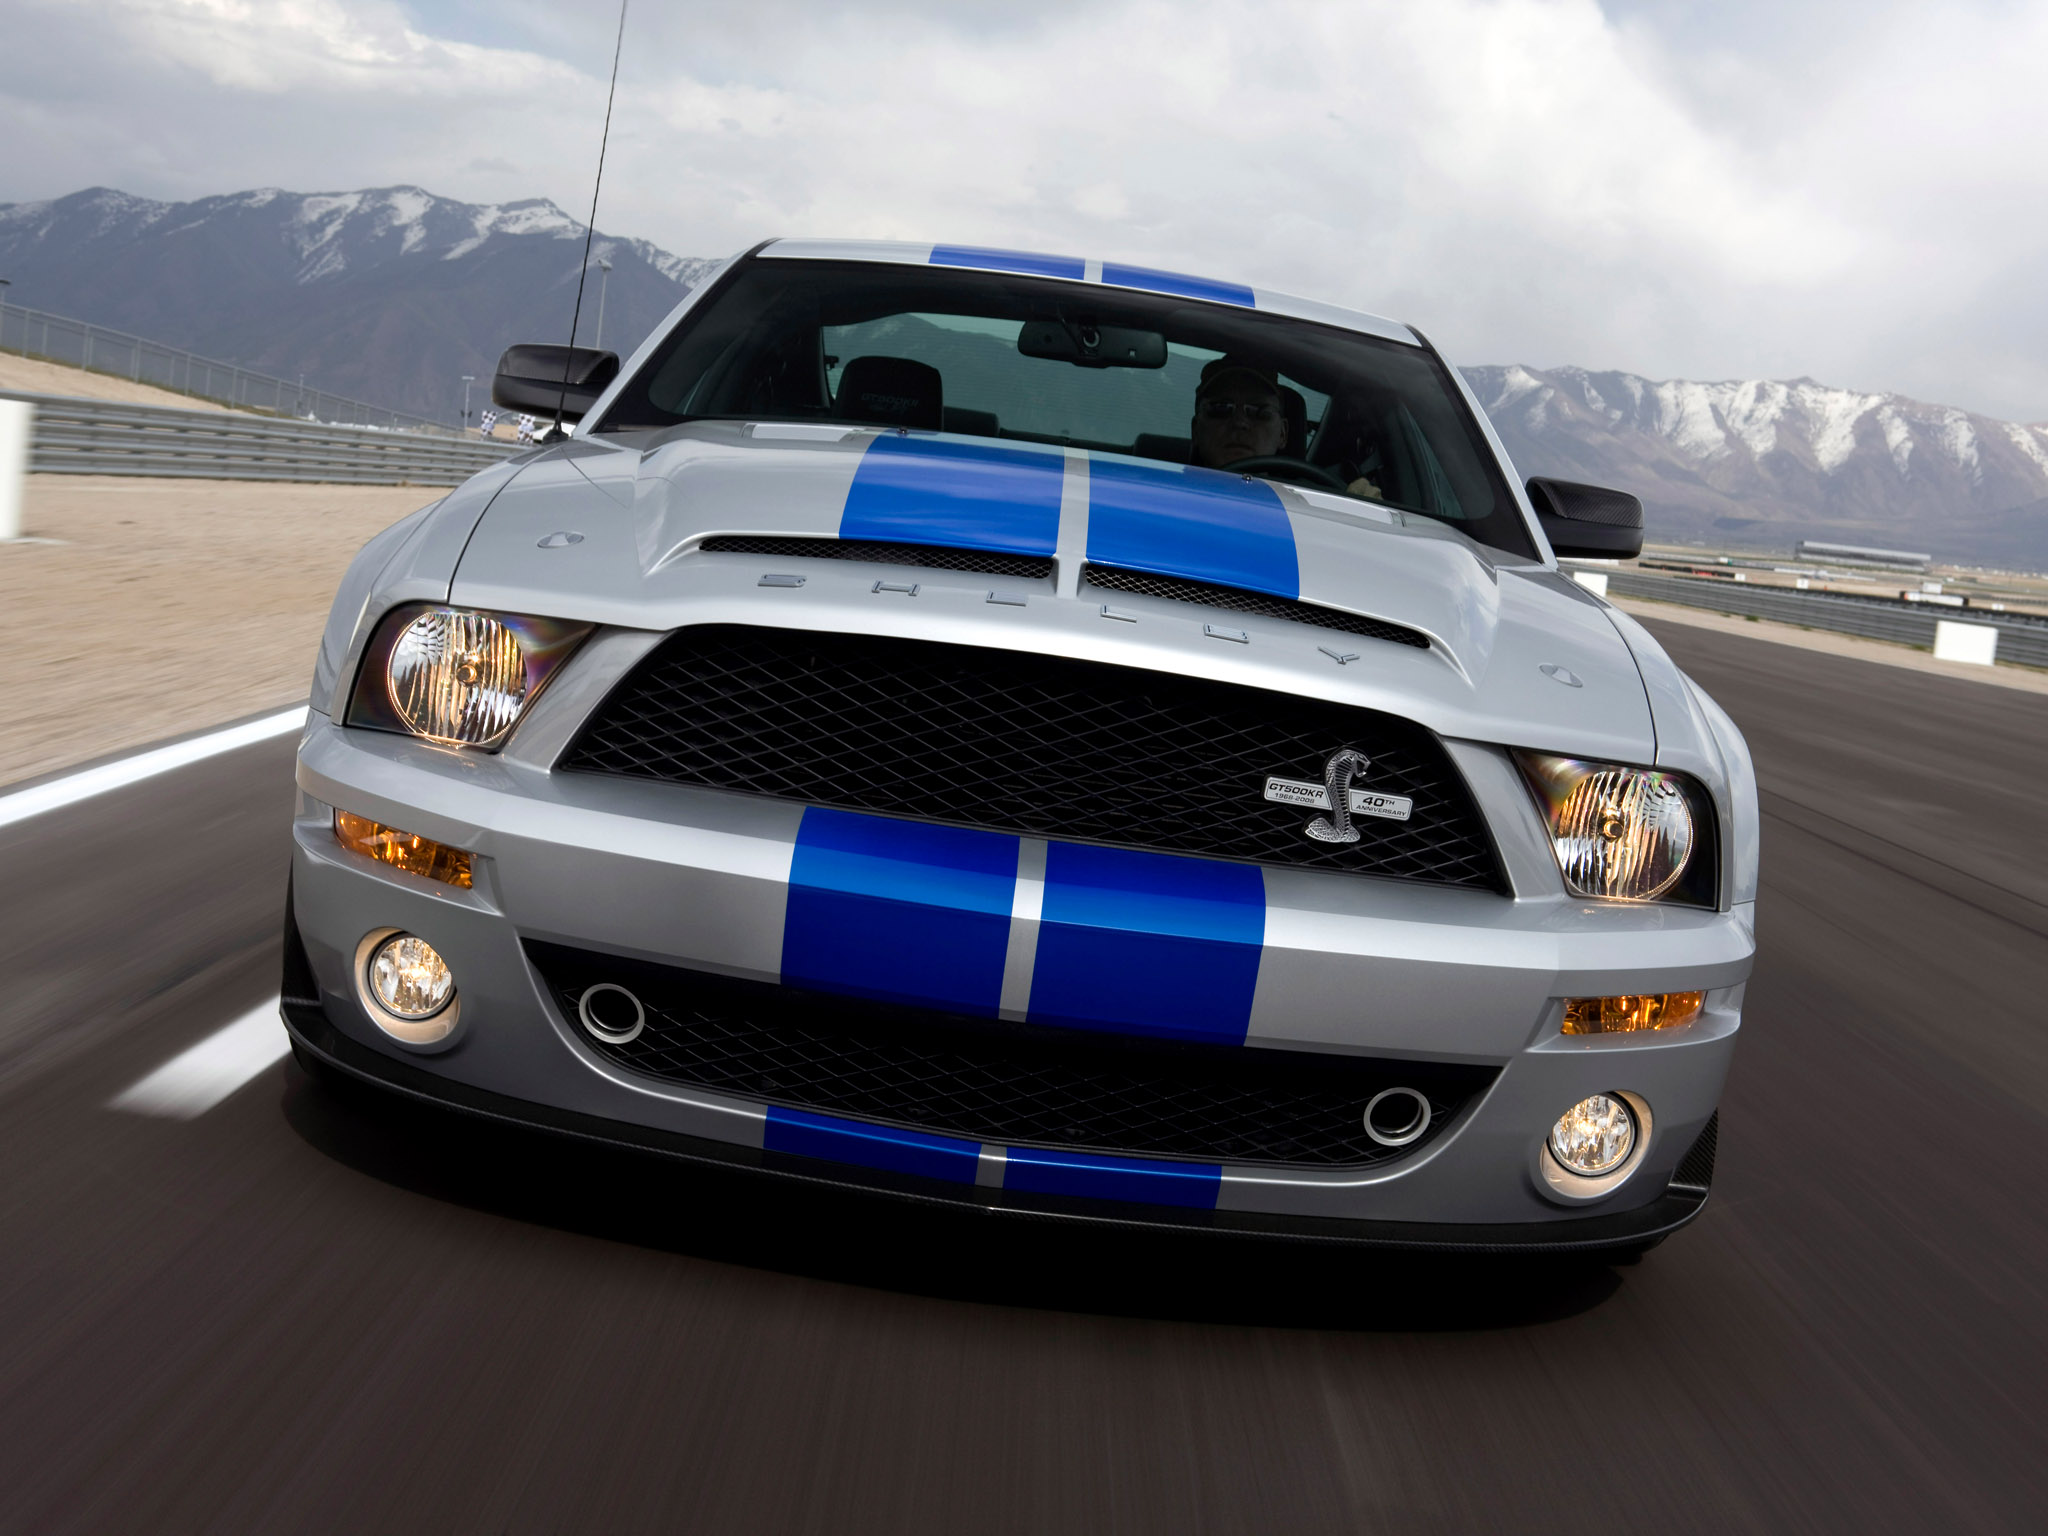 2008, Shelby, Gt500 kr, Gt500, Ford, Mustang, Muscle, Classic Wallpaper